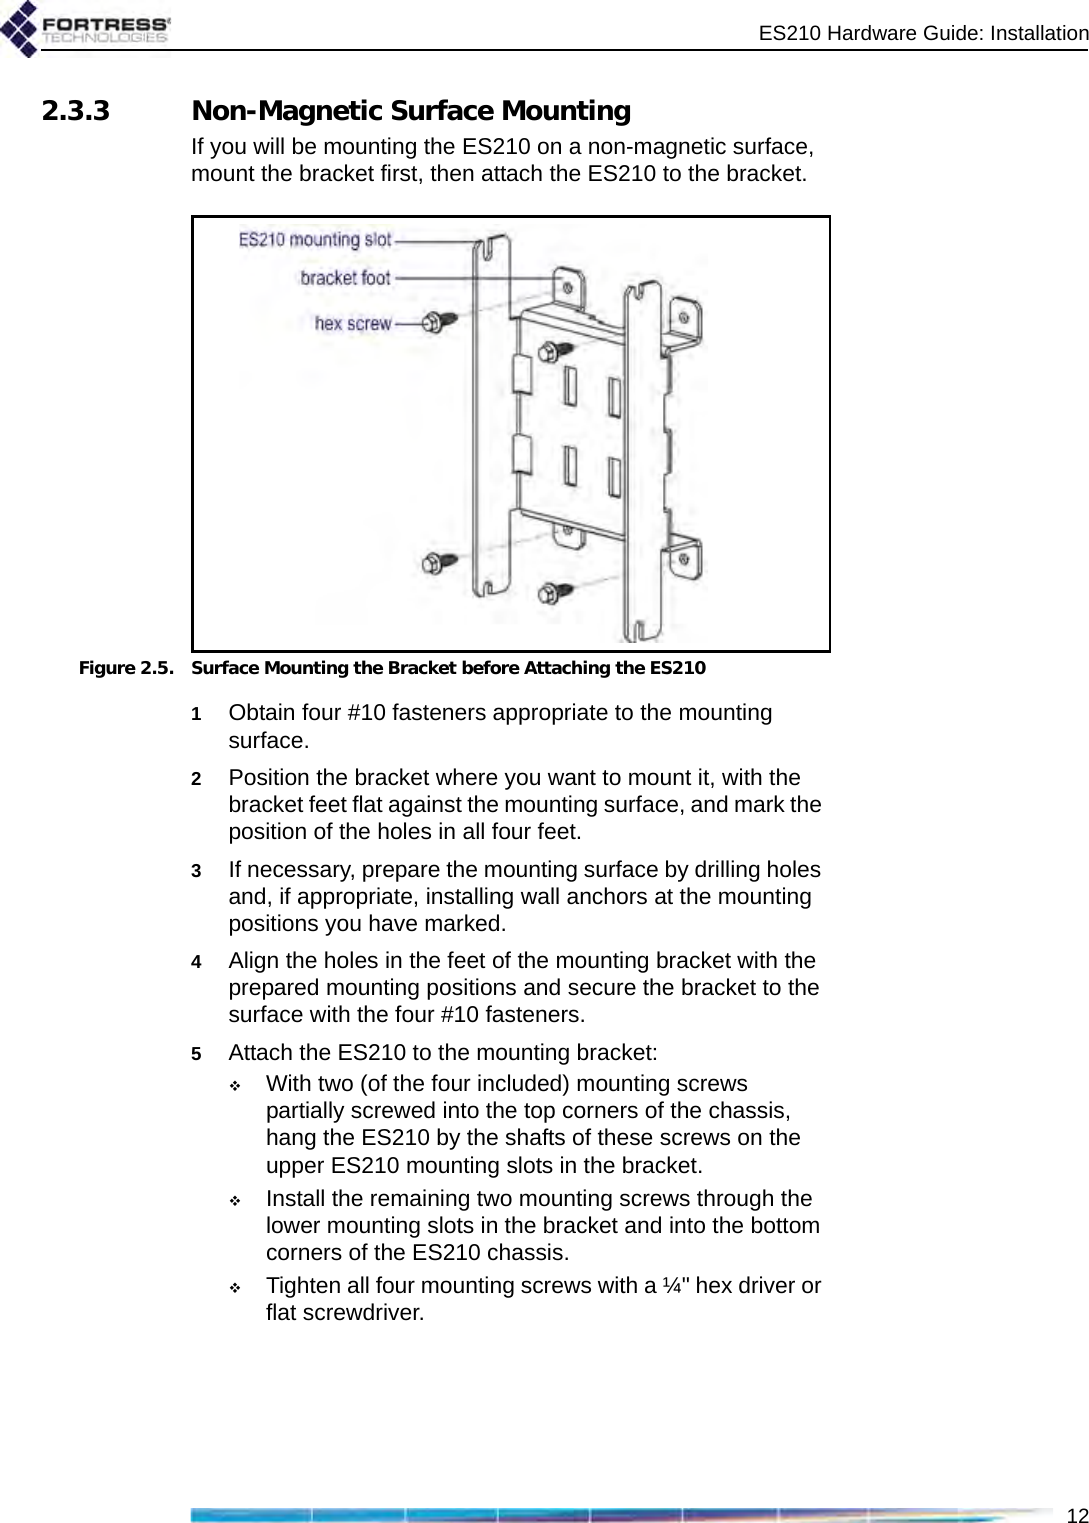 ES210 Hardware Guide: Installation122.3.3 Non-Magnetic Surface MountingIf you will be mounting the ES210 on a non-magnetic surface, mount the bracket first, then attach the ES210 to the bracket.Figure 2.5. Surface Mounting the Bracket before Attaching the ES2101Obtain four #10 fasteners appropriate to the mounting surface.2Position the bracket where you want to mount it, with the bracket feet flat against the mounting surface, and mark the position of the holes in all four feet. 3If necessary, prepare the mounting surface by drilling holes and, if appropriate, installing wall anchors at the mounting positions you have marked.4Align the holes in the feet of the mounting bracket with the prepared mounting positions and secure the bracket to the surface with the four #10 fasteners.5Attach the ES210 to the mounting bracket: With two (of the four included) mounting screws partially screwed into the top corners of the chassis, hang the ES210 by the shafts of these screws on the upper ES210 mounting slots in the bracket.Install the remaining two mounting screws through the lower mounting slots in the bracket and into the bottom corners of the ES210 chassis.Tighten all four mounting screws with a ¼&quot; hex driver or flat screwdriver.